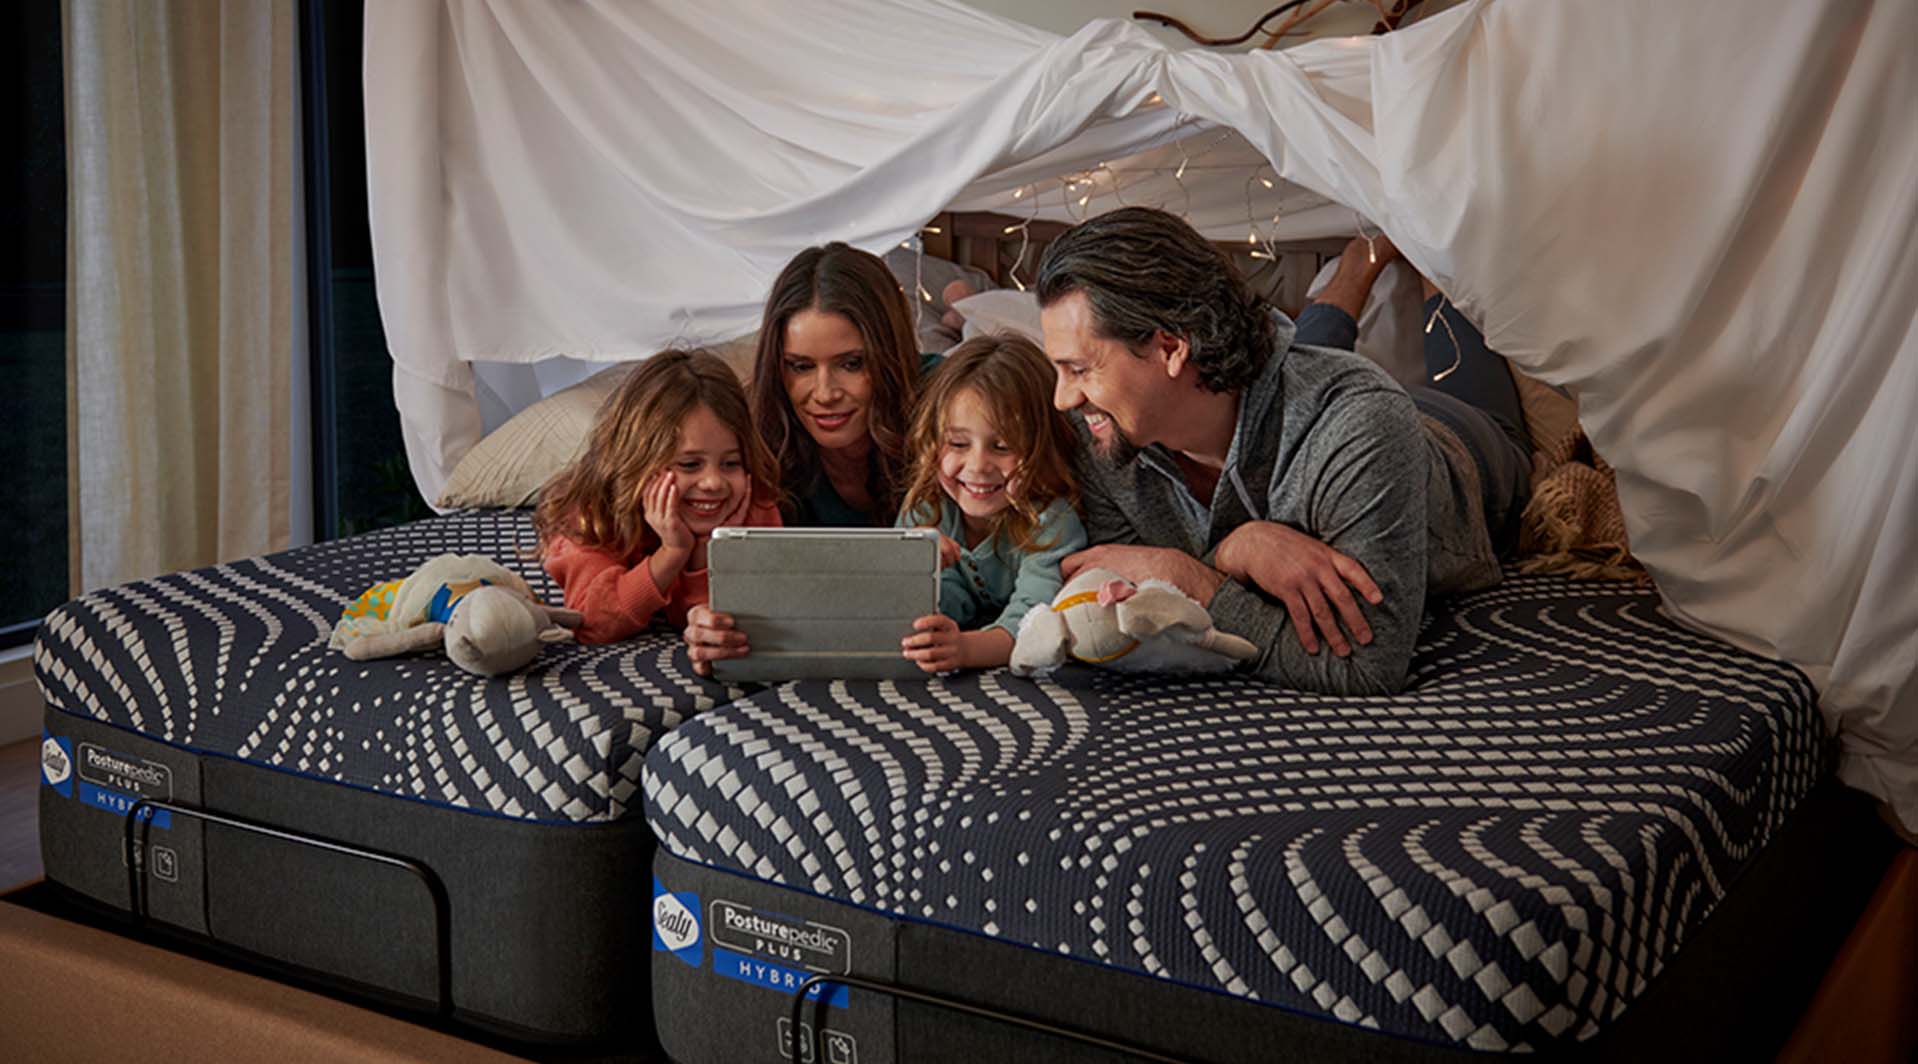 Family of four using tablet on Sealy® mattress